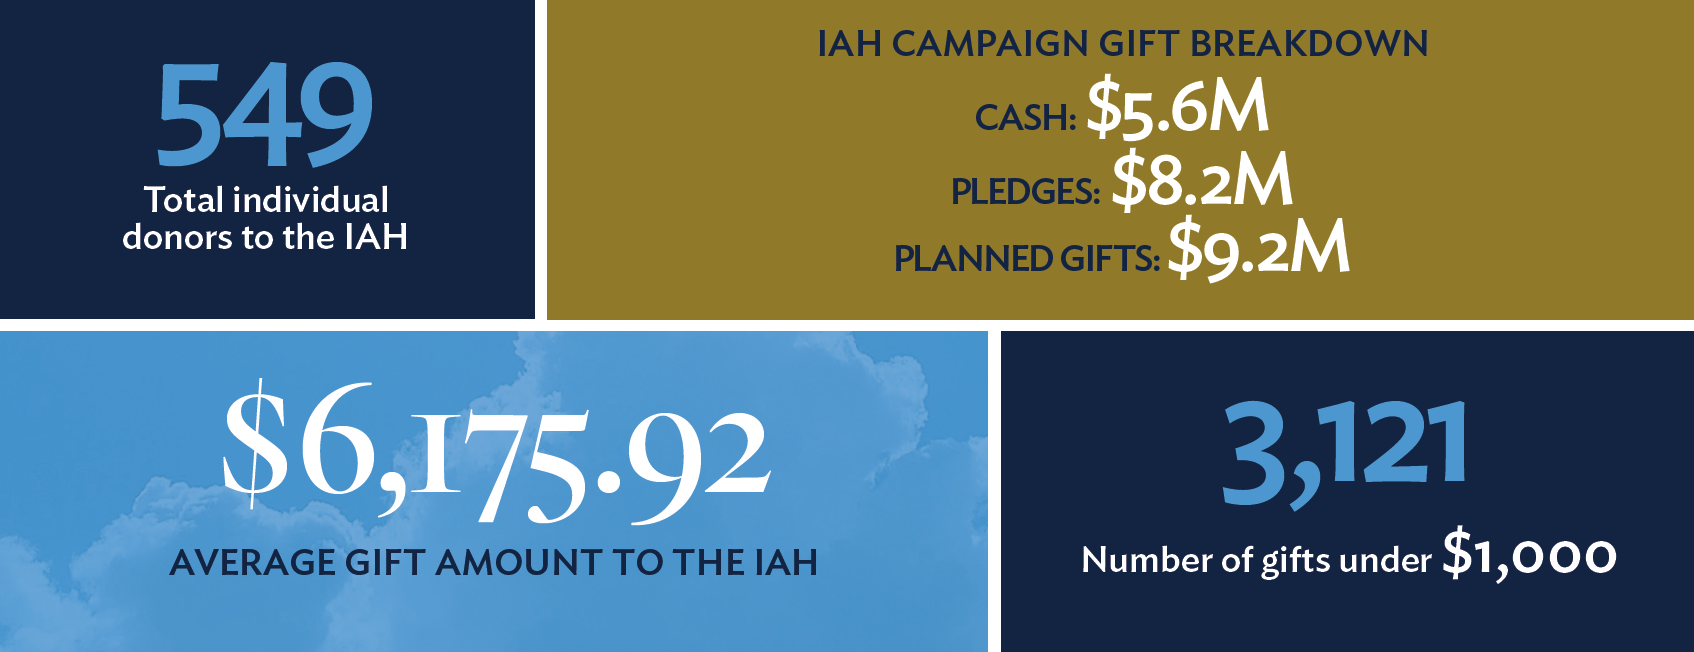 Total individual donors to the IAH: 549. IAH campaign gift breakdown: Cash: $5.6M, Pledges: $8.2M, Planned Gifts: $9.2M. Average gift amount to the IAH: $6,175.92 Number of gifts under $1,000: 3,121